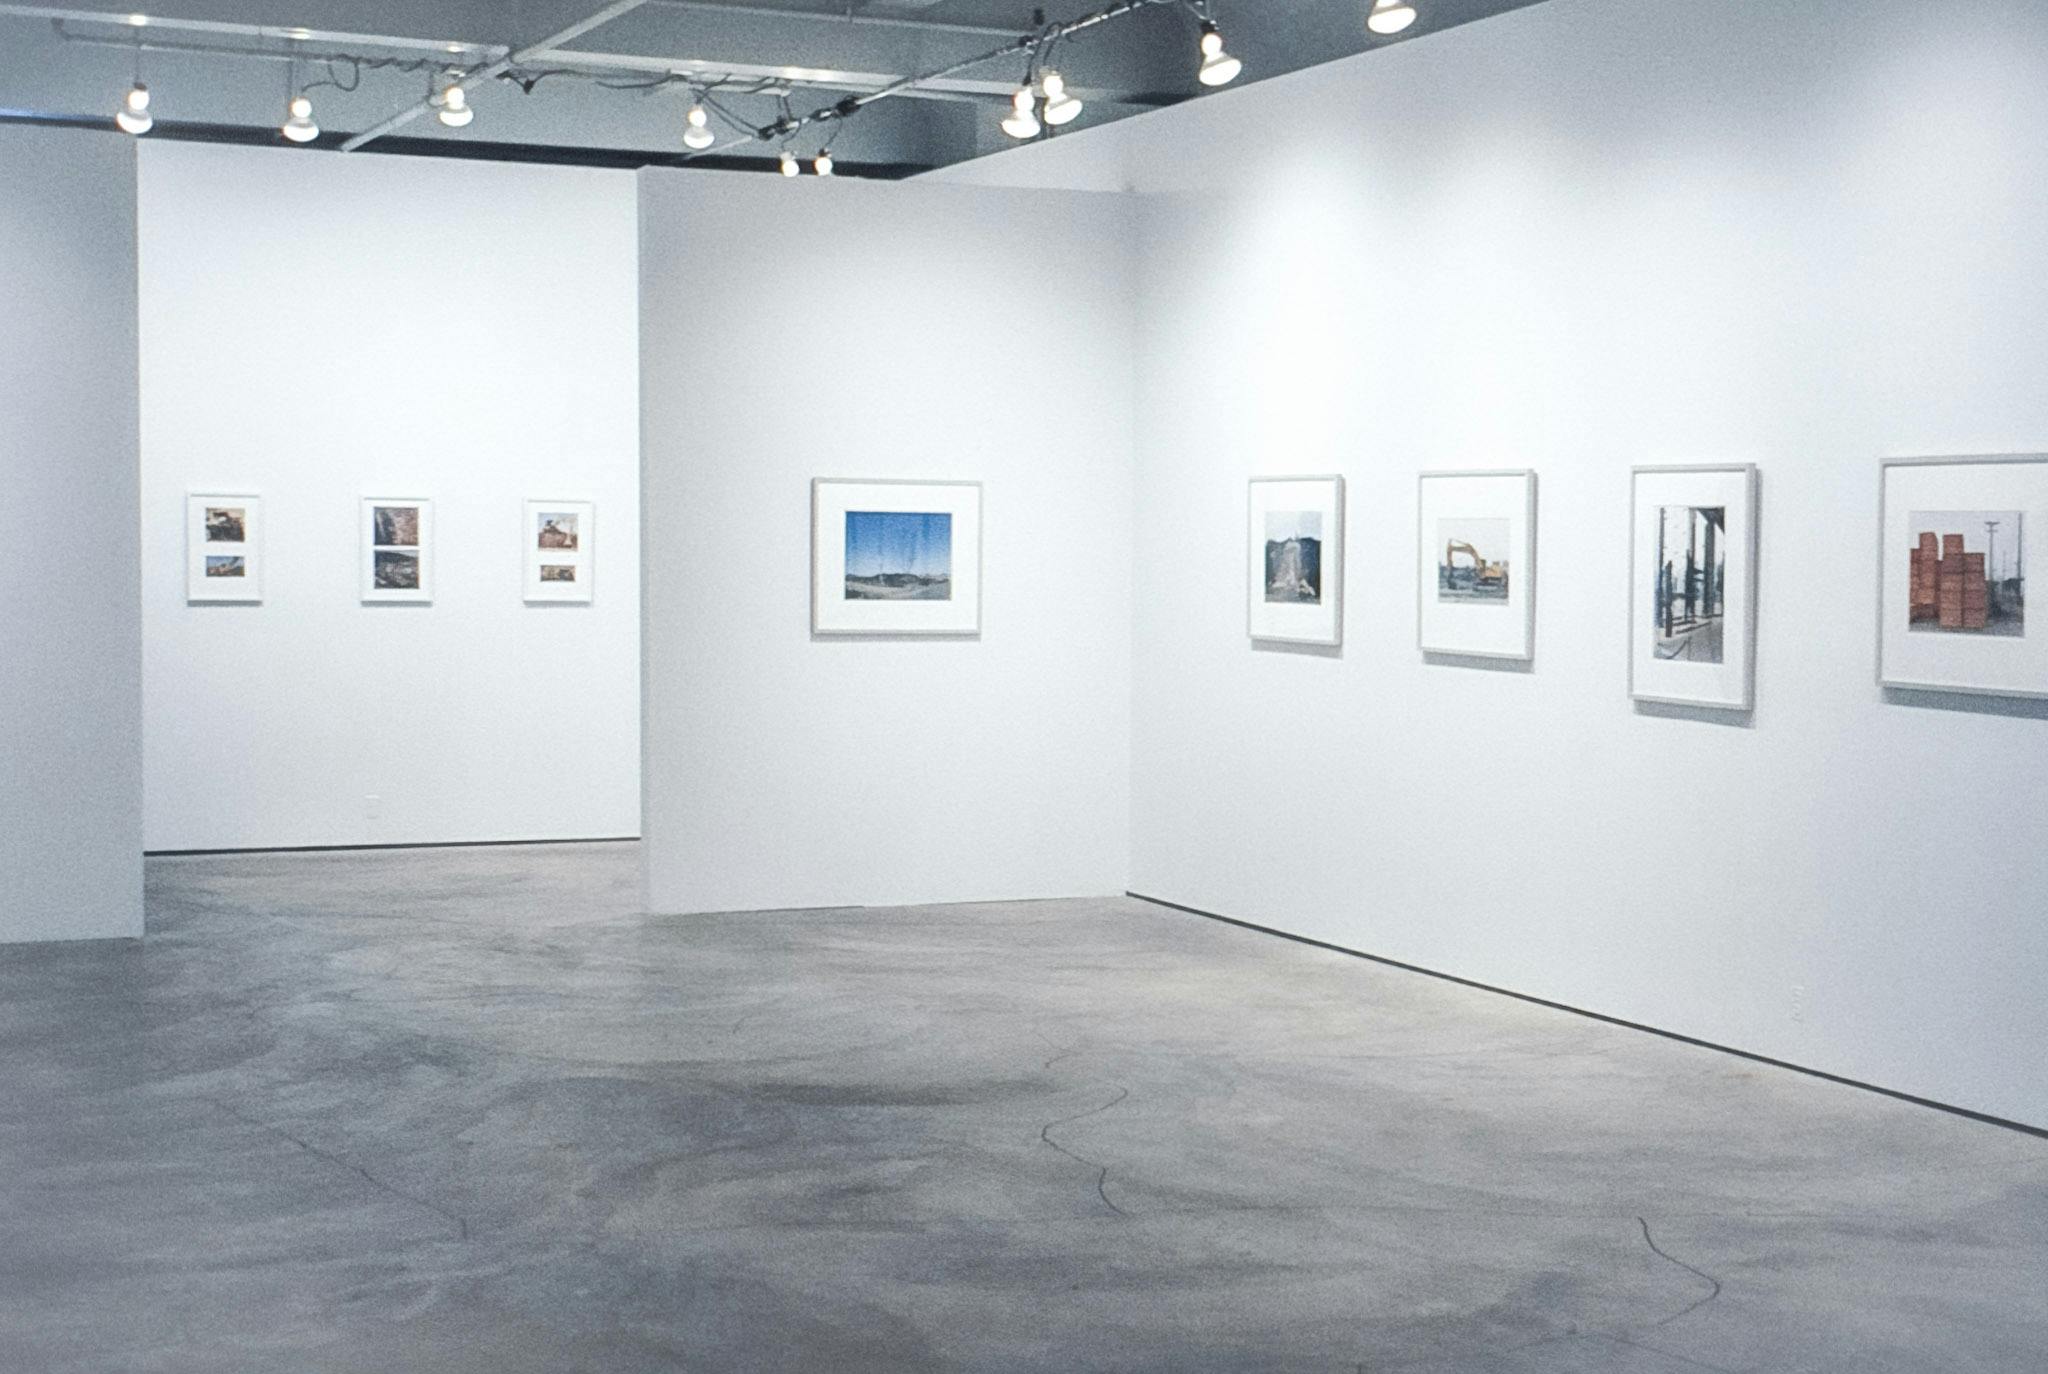 The walls of a gallery space and a hallway. On all walls, there are framed photo works. The frames in the hallway contain 2 photos, and the frames in the interior walls have 1 larger photo in them. 